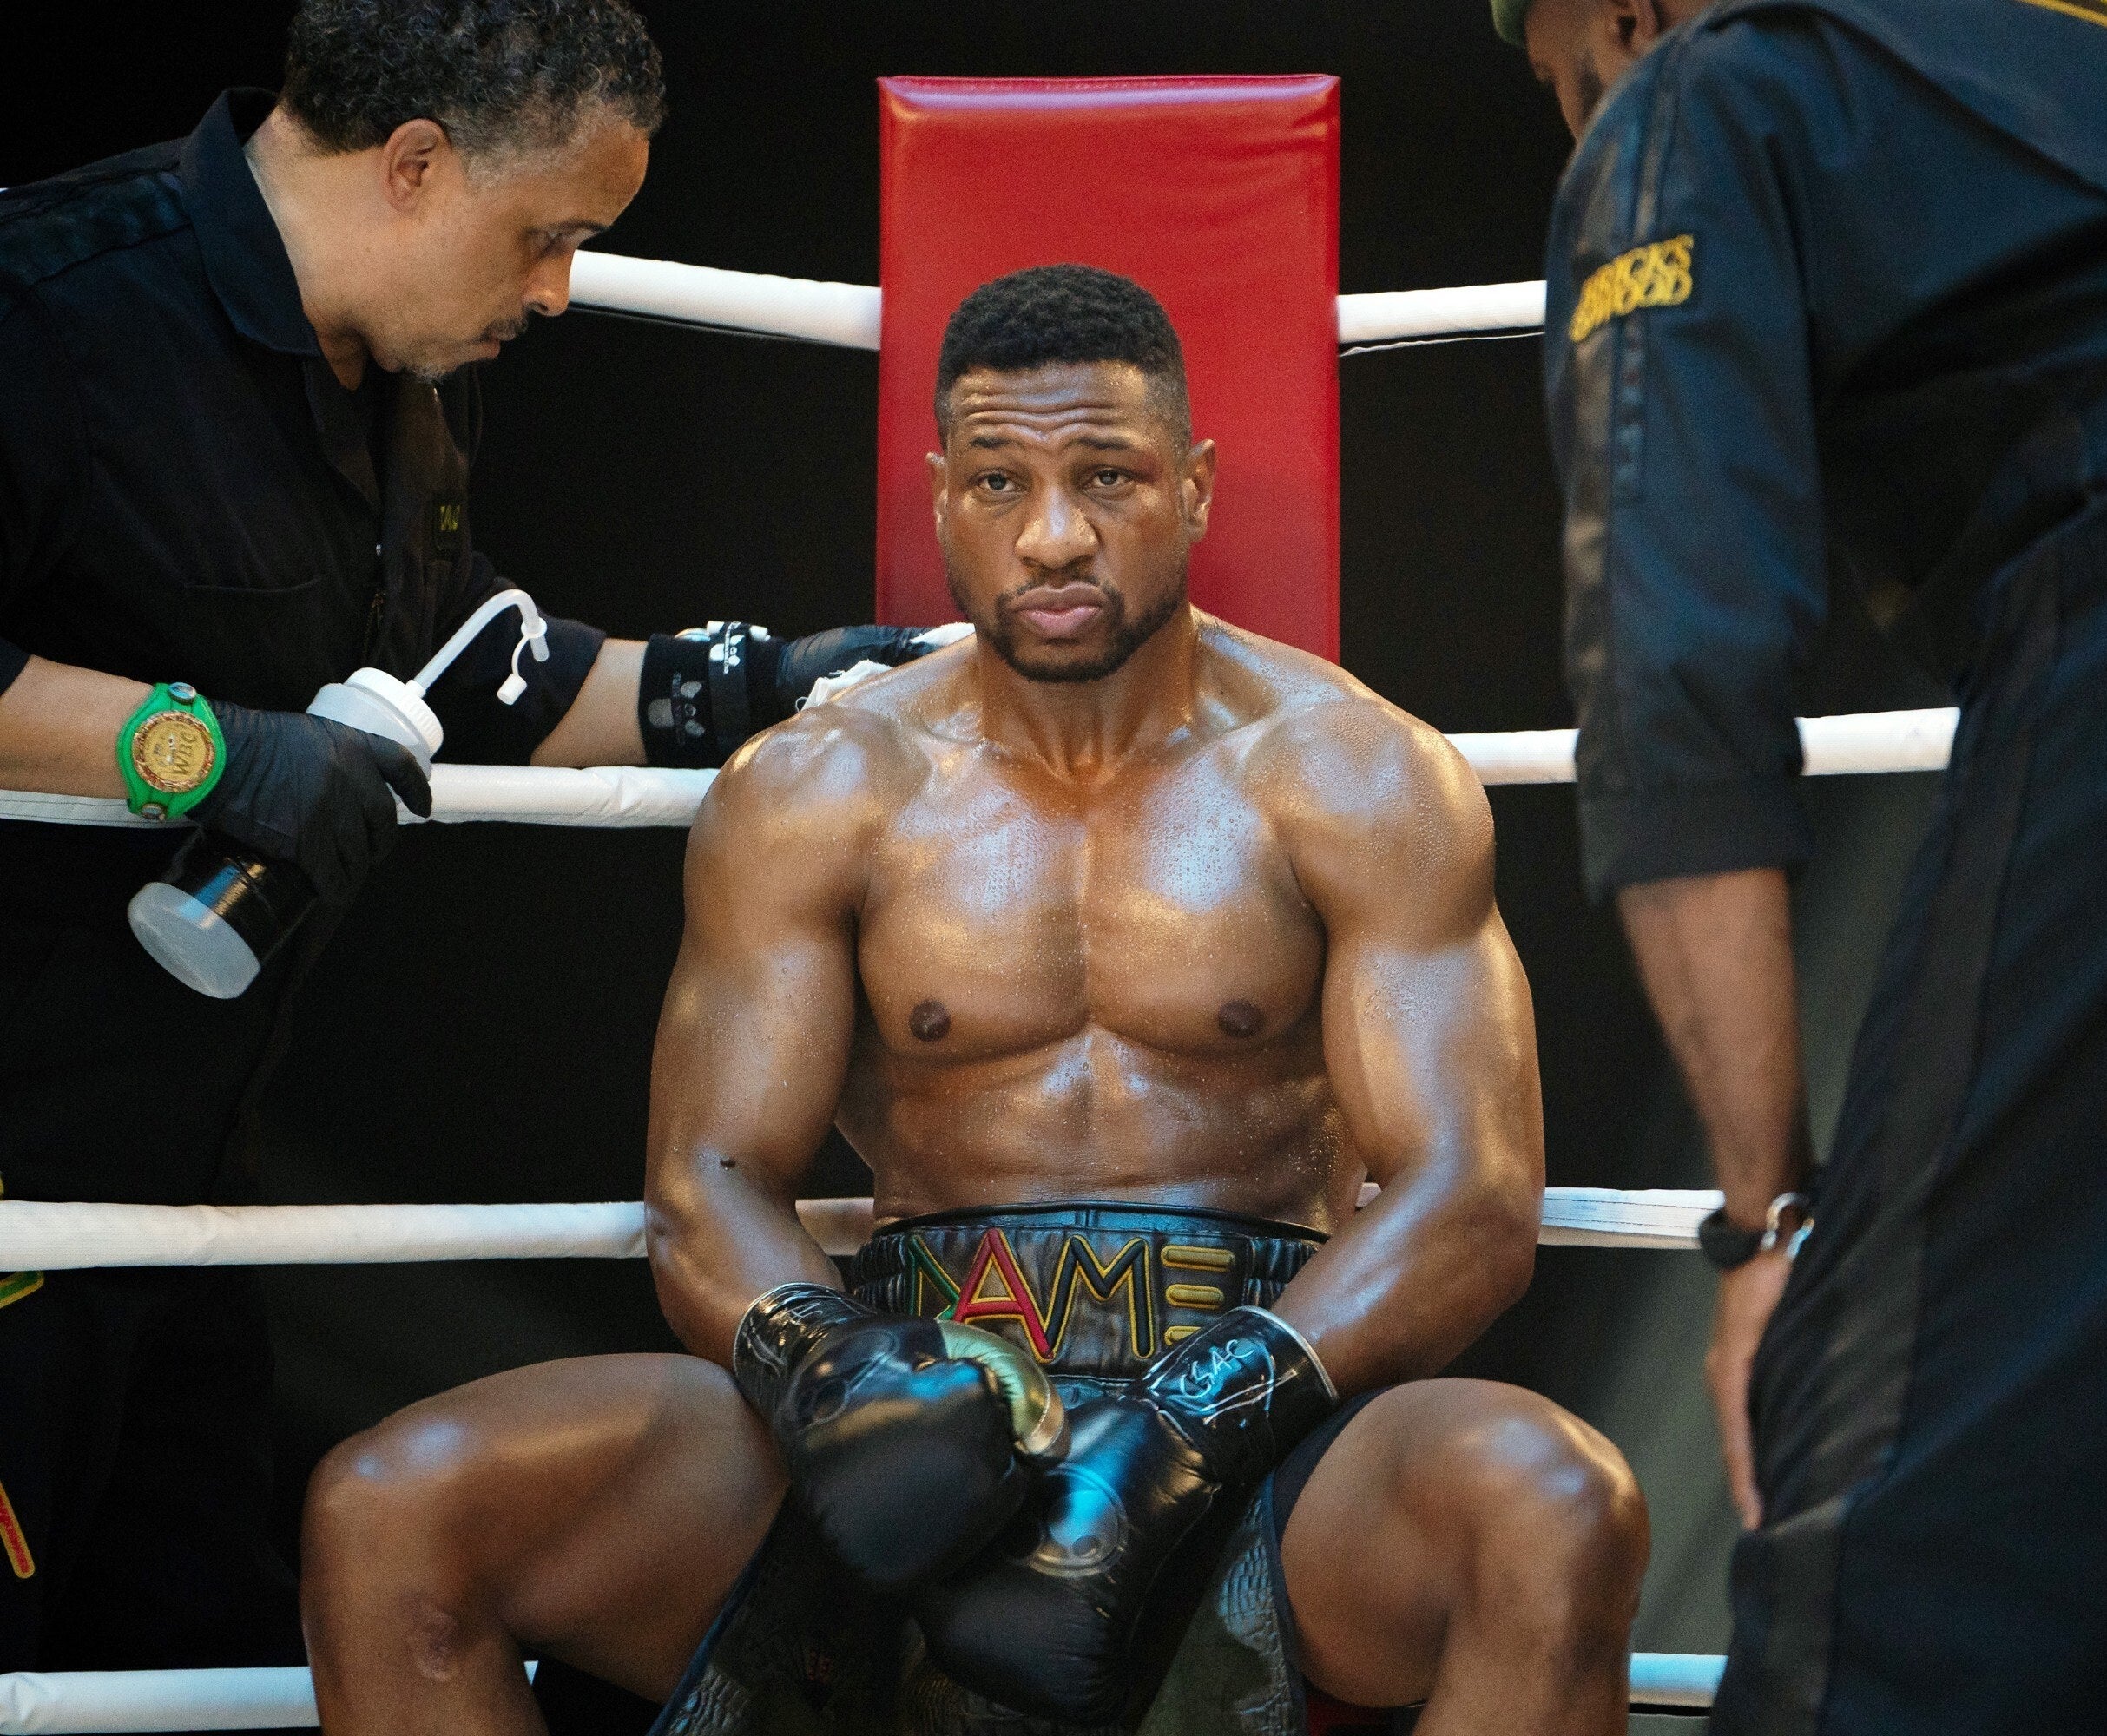 Jonathan Majors and two ring guys in Creed III